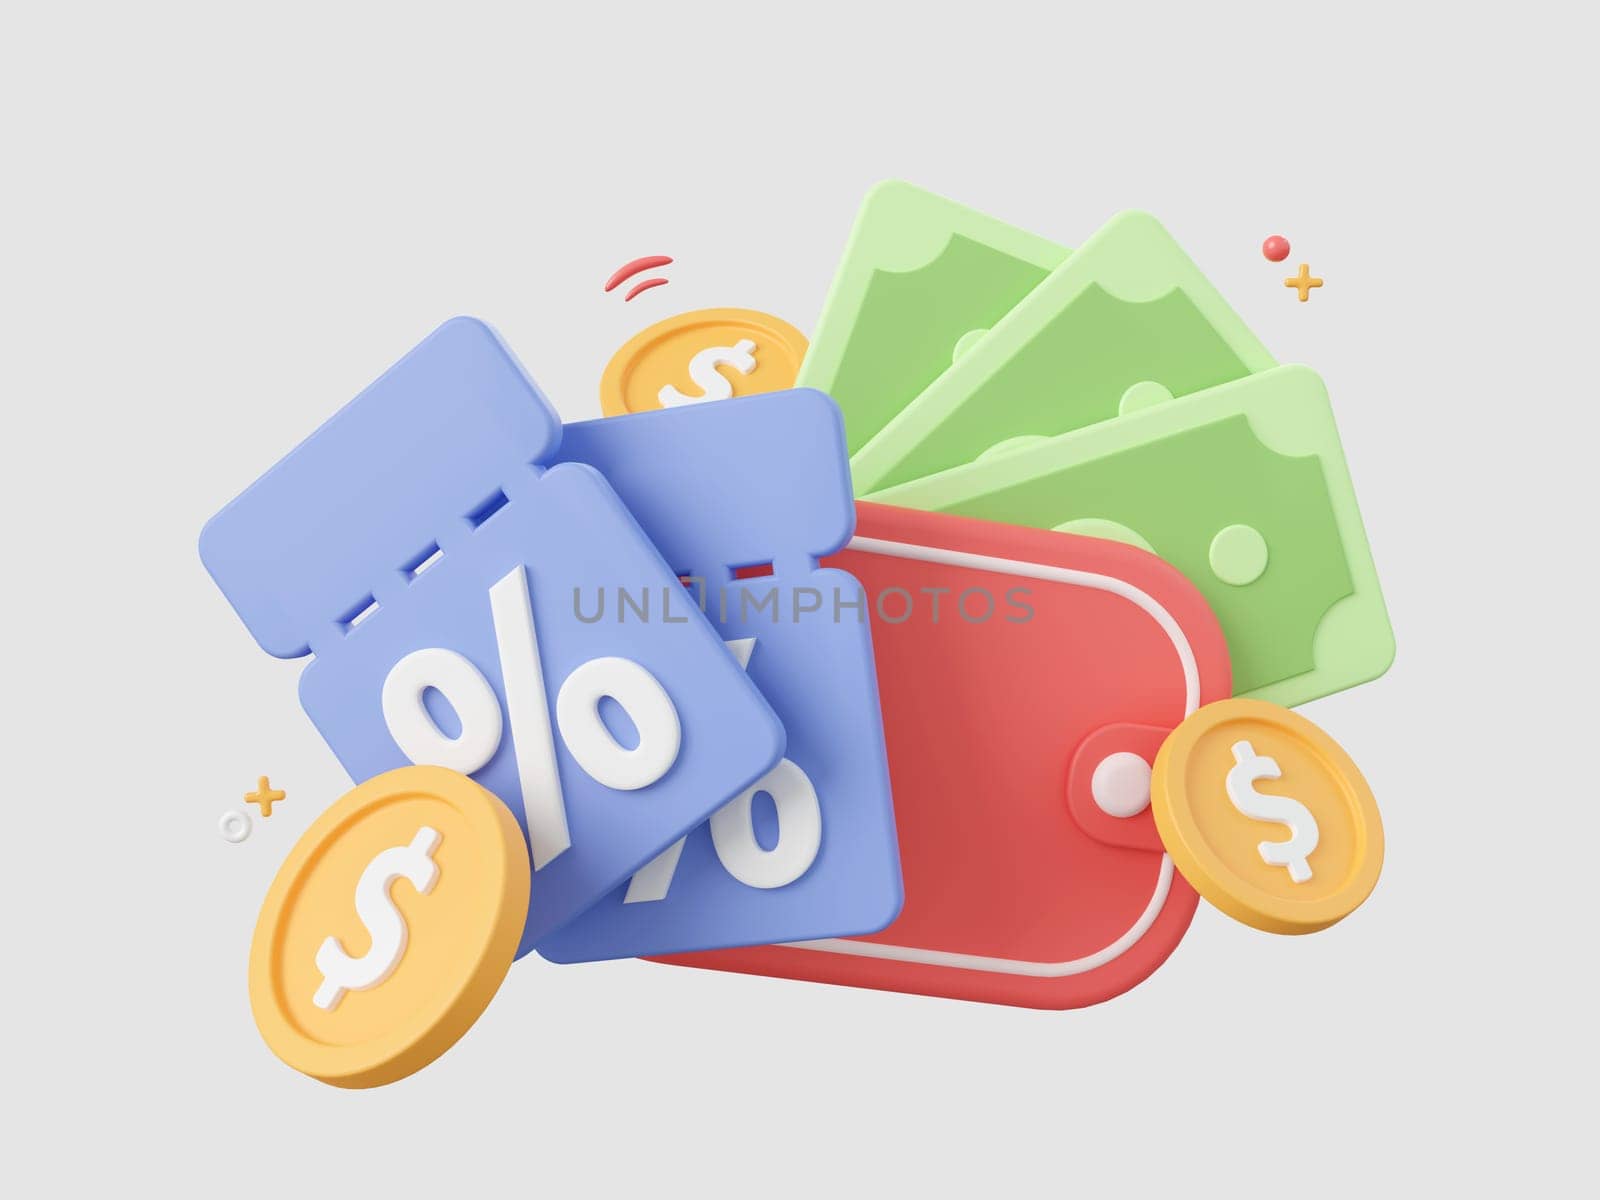 3d cartoon design illustration of Money wallet with discount code, Shopping and money online concept.